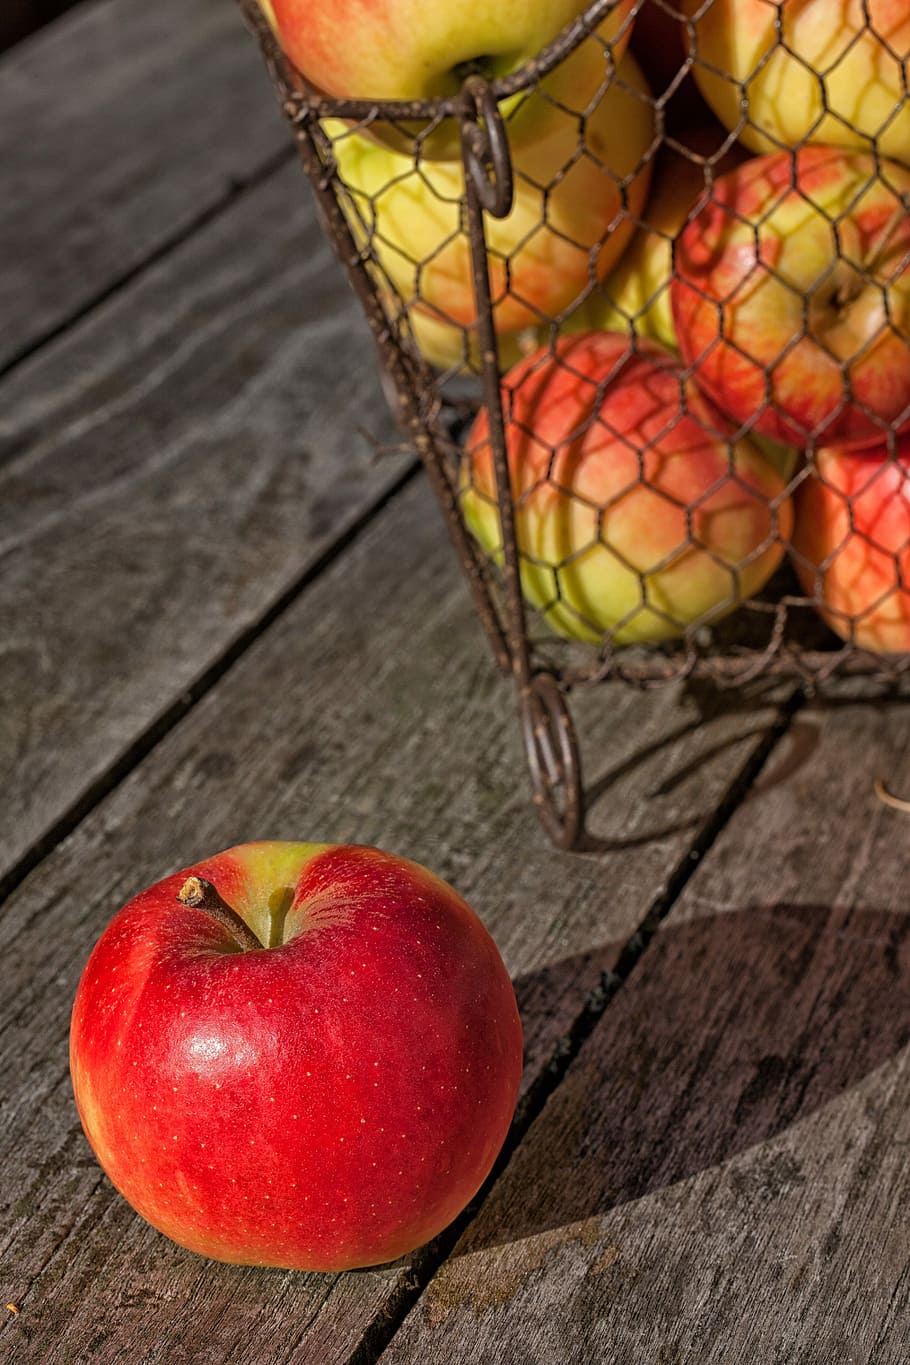 apple, harvest, fruit, red, apfelernte, summer, autumn, healthy, food and drink, healthy eating